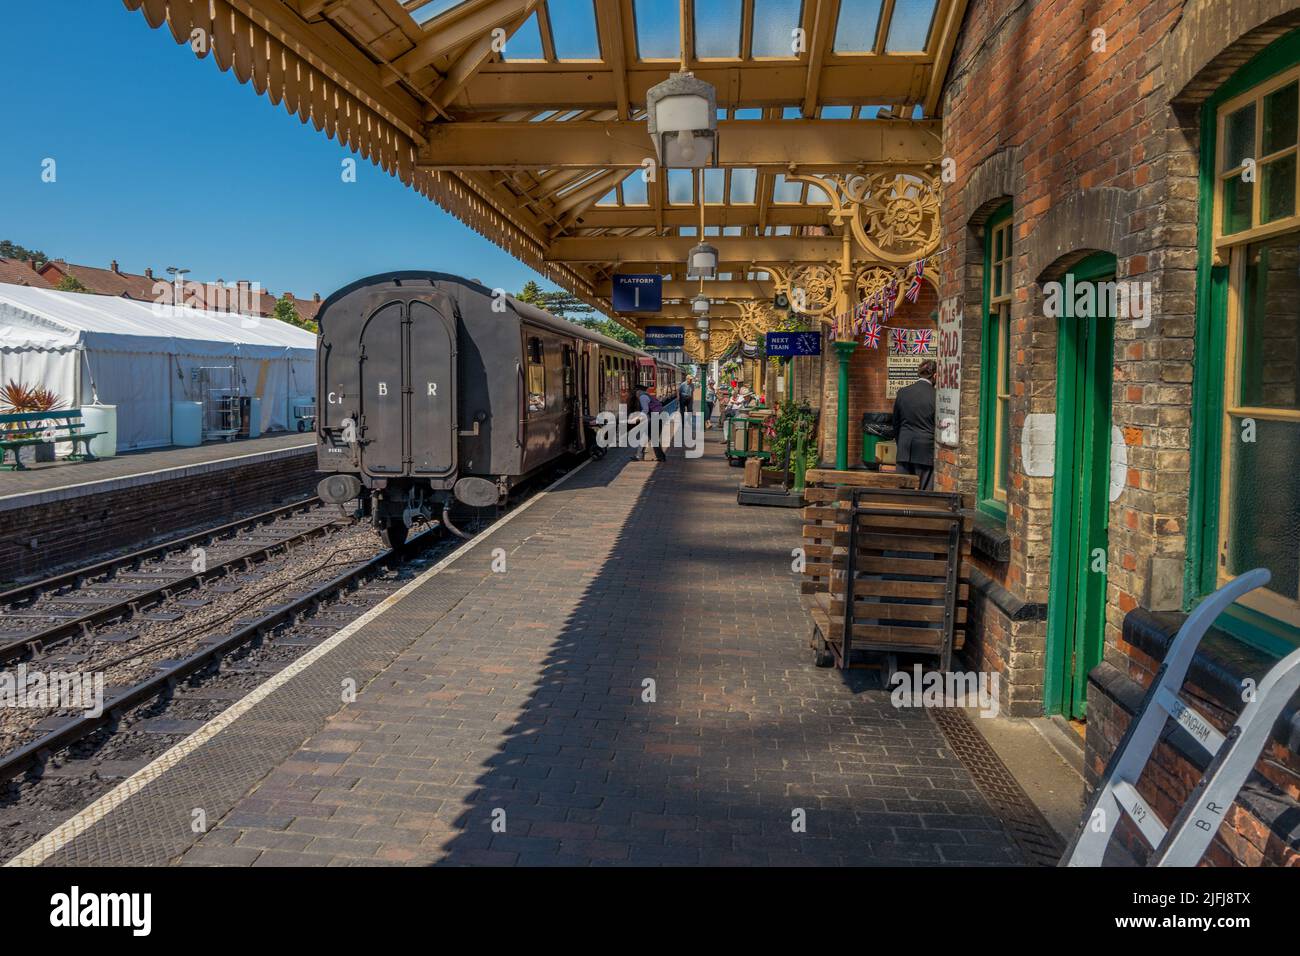 Passengers and tourist on the platform at the historic railway station at Sheringham which is part of the North Norfolk railway. Stock Photo